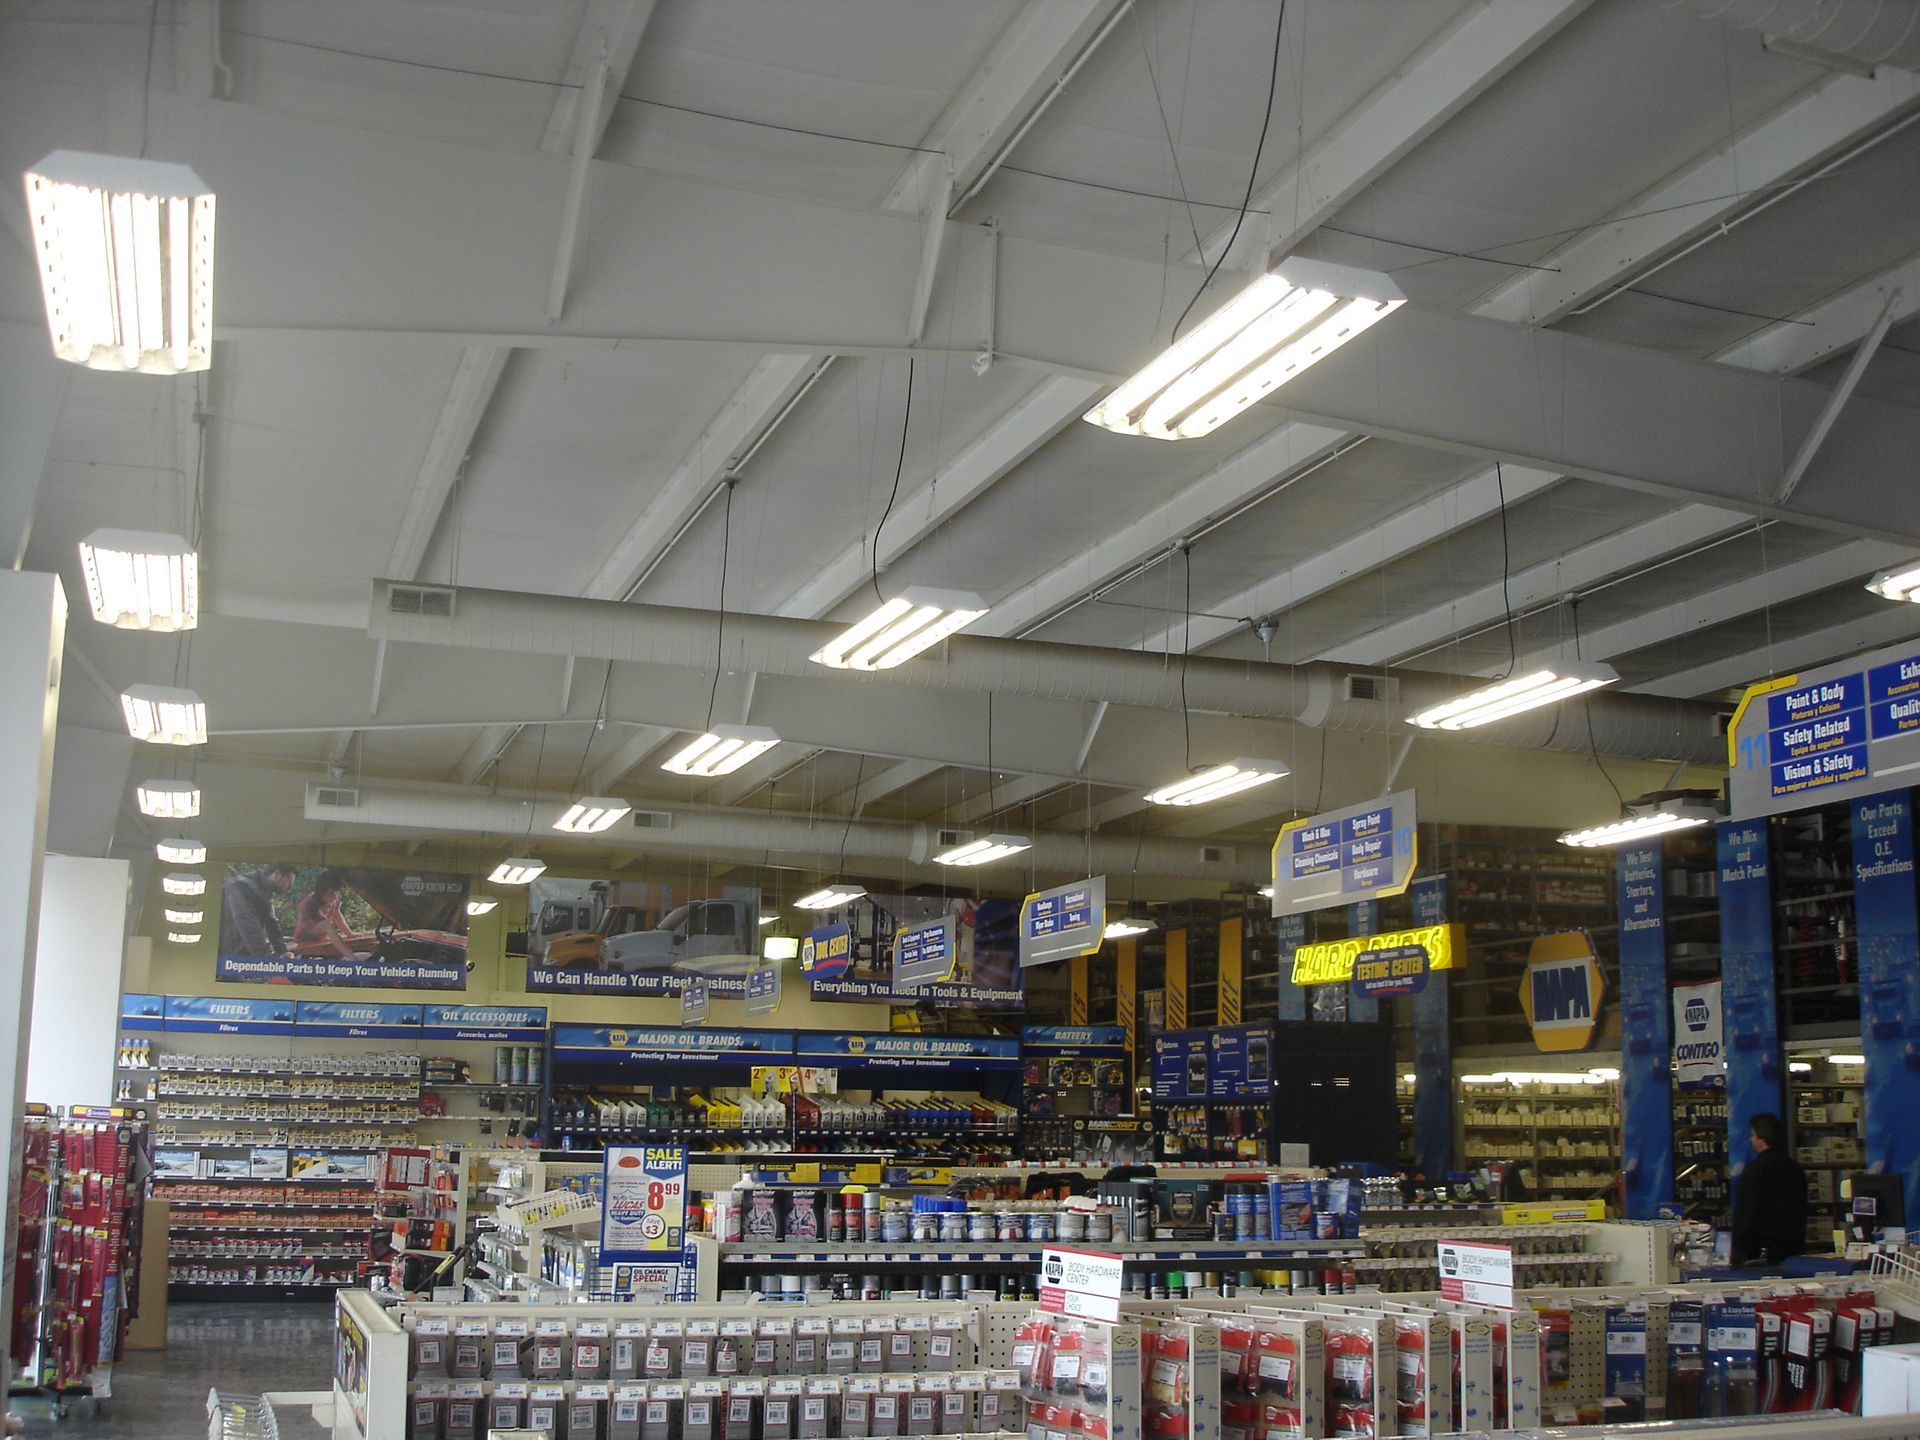 The inside of a store with a sign that says napa